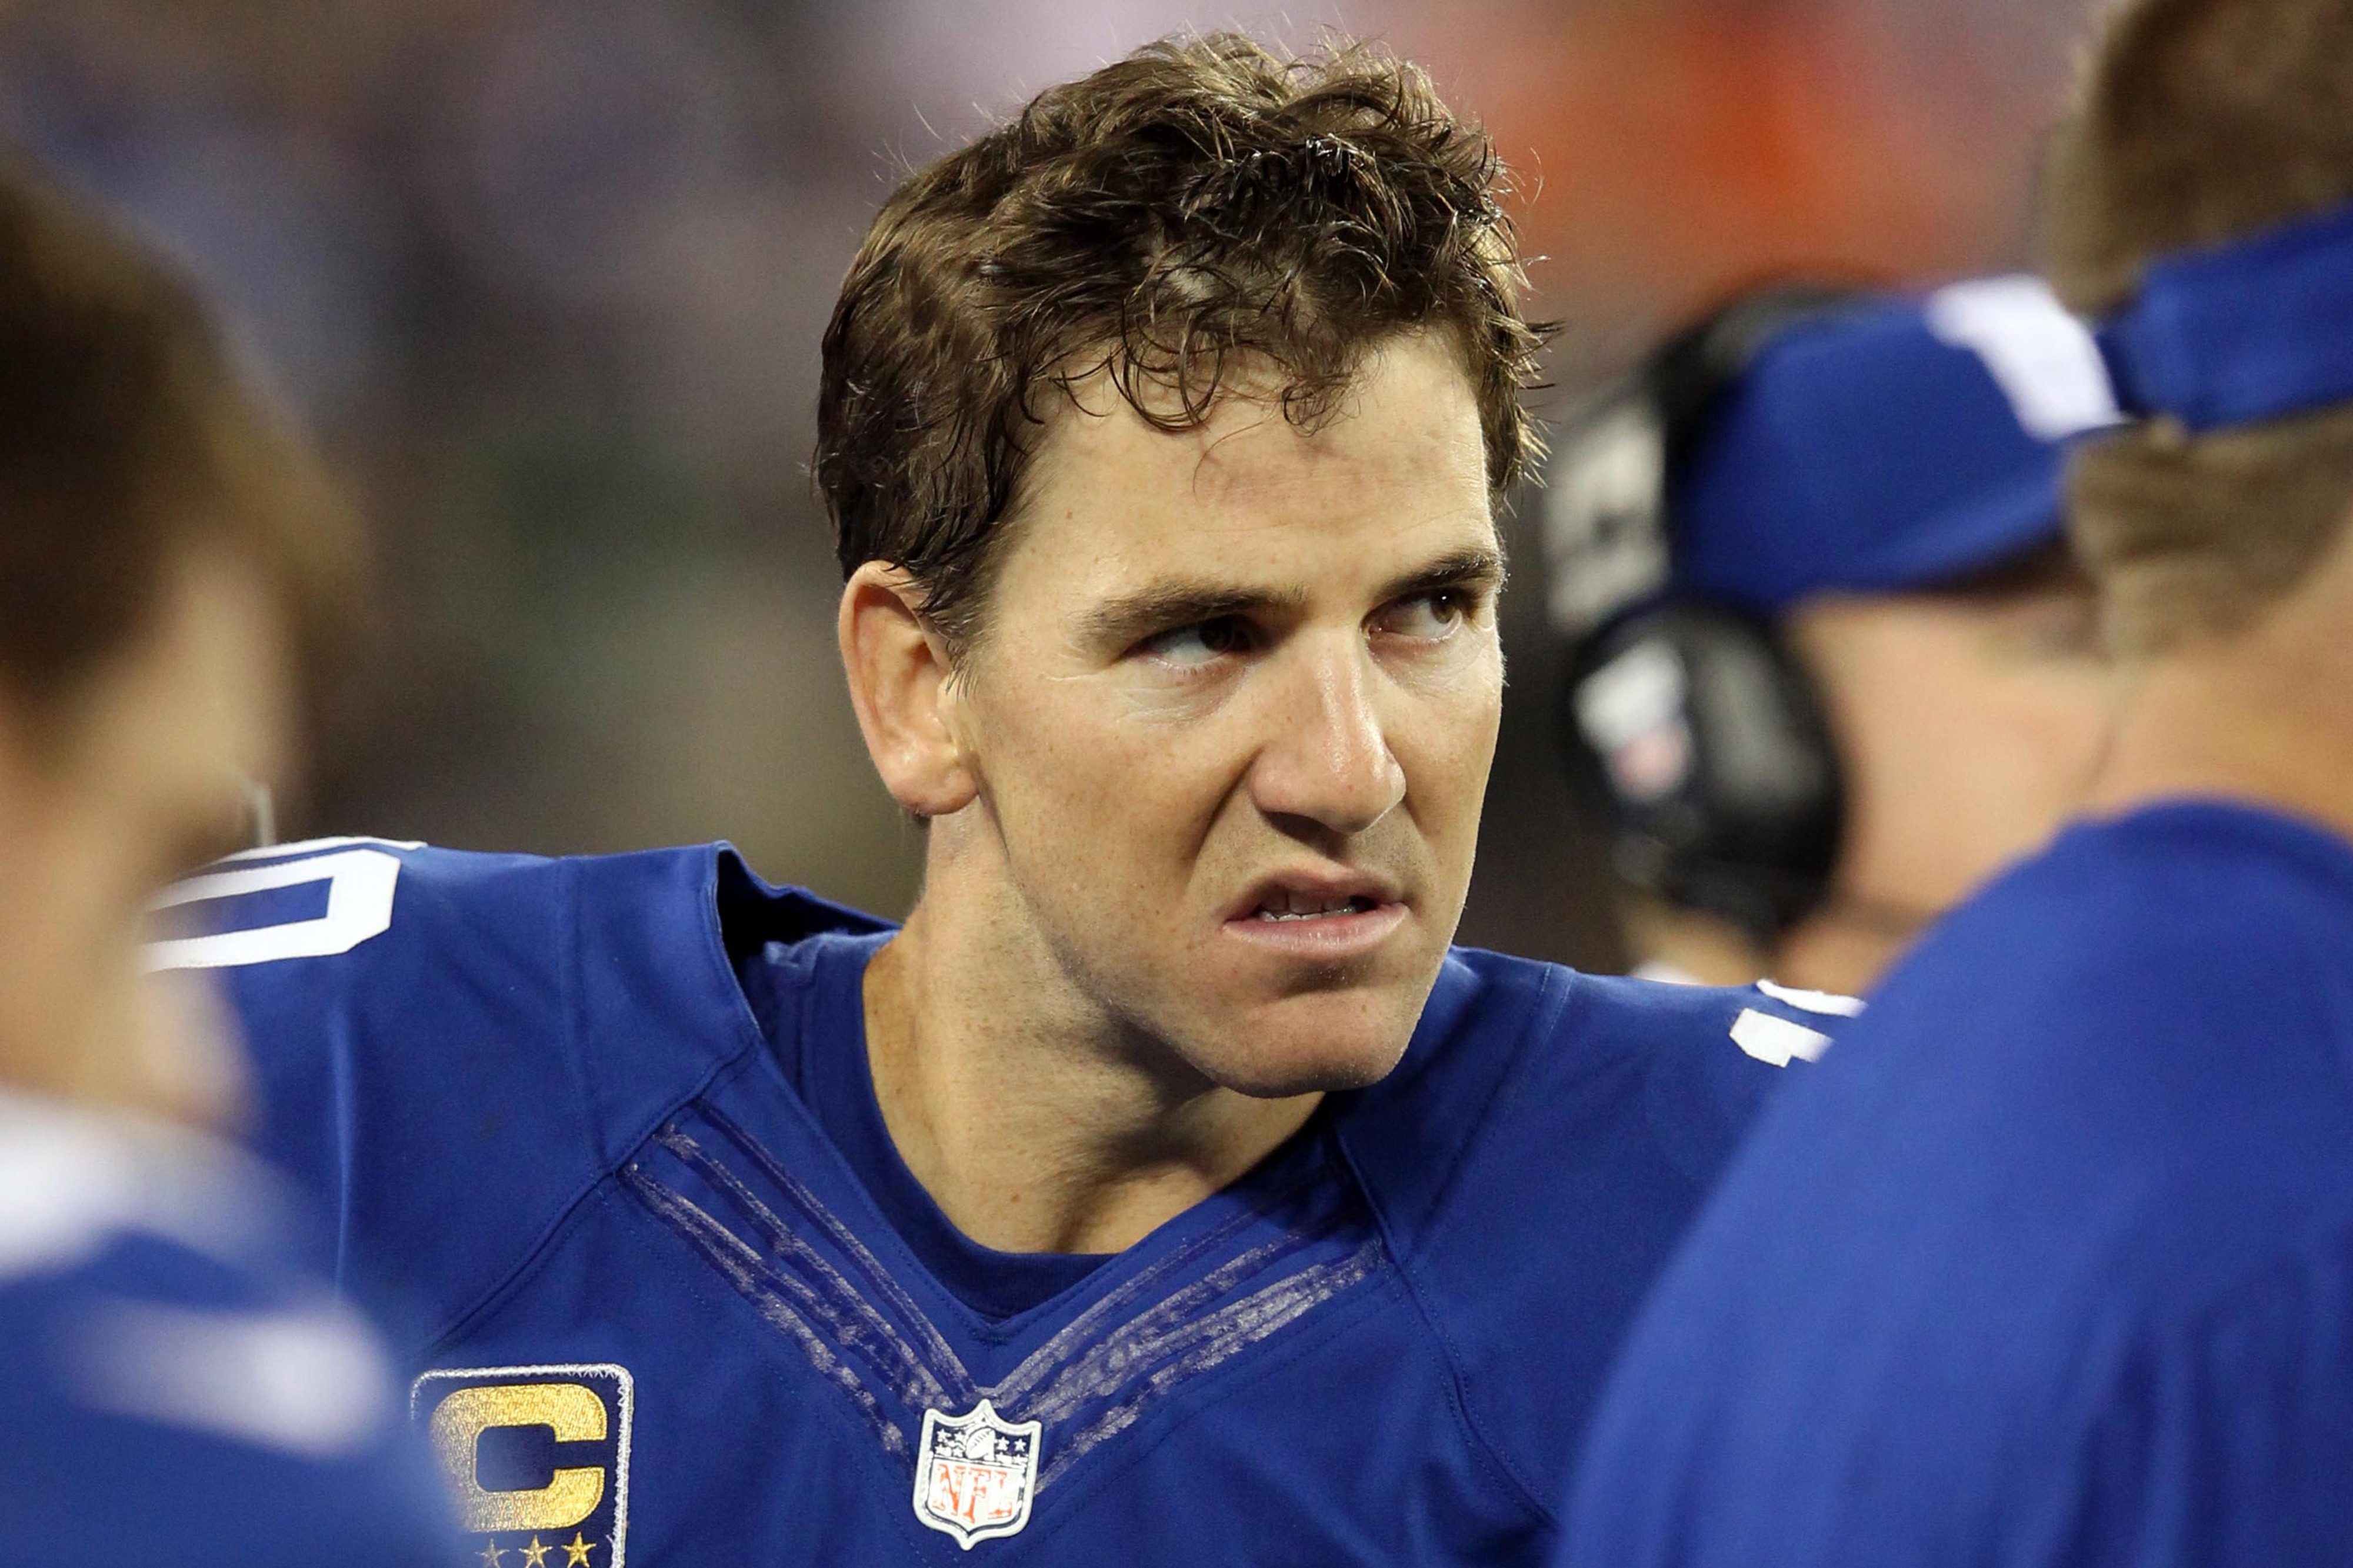 Sunday was an Eli Face kind of night.